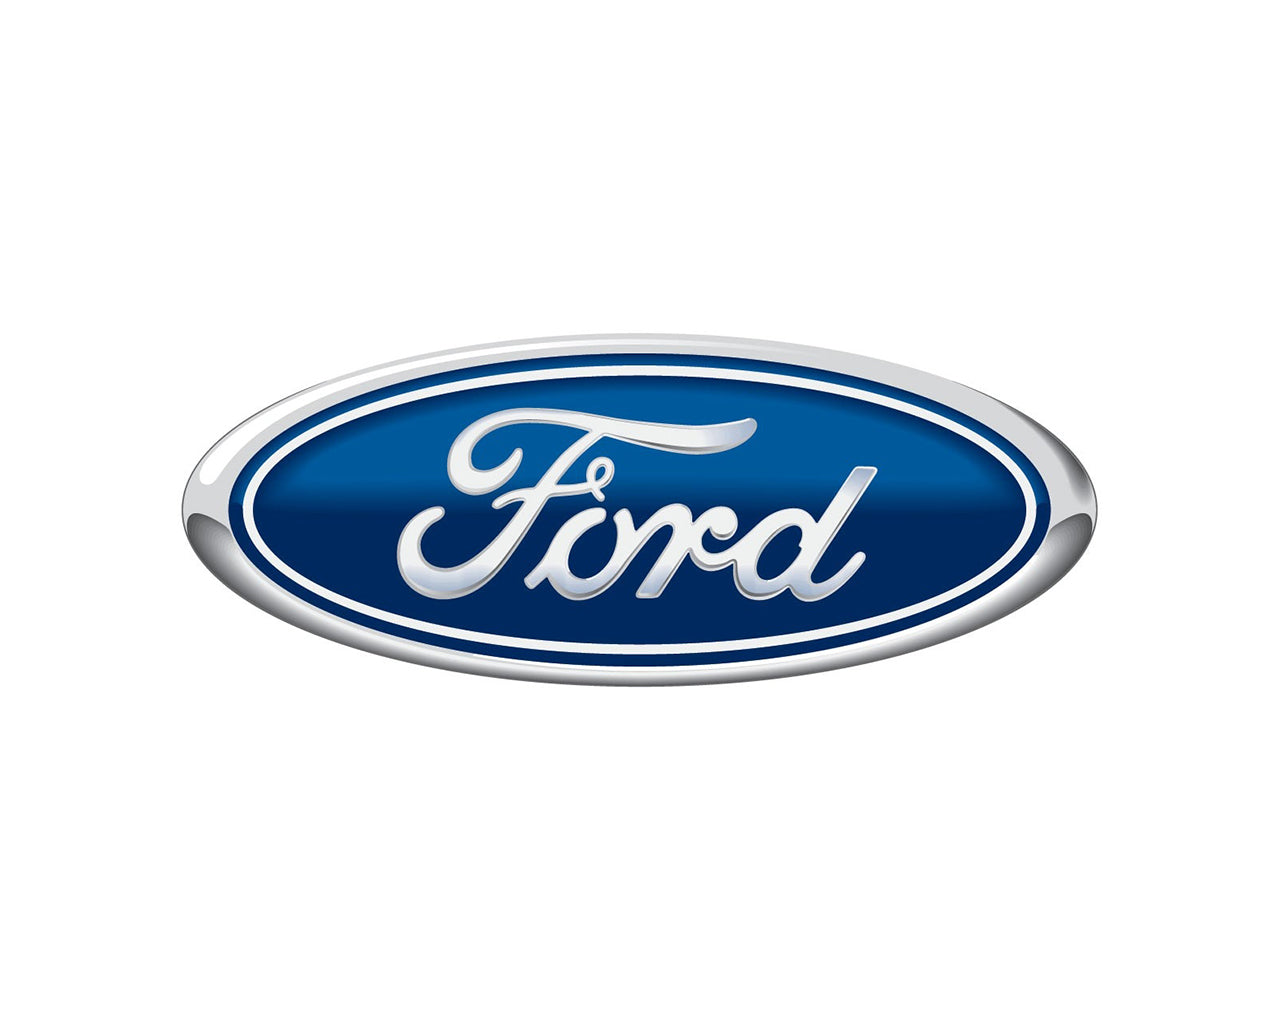 Oval Ford Logo blue and white on white background